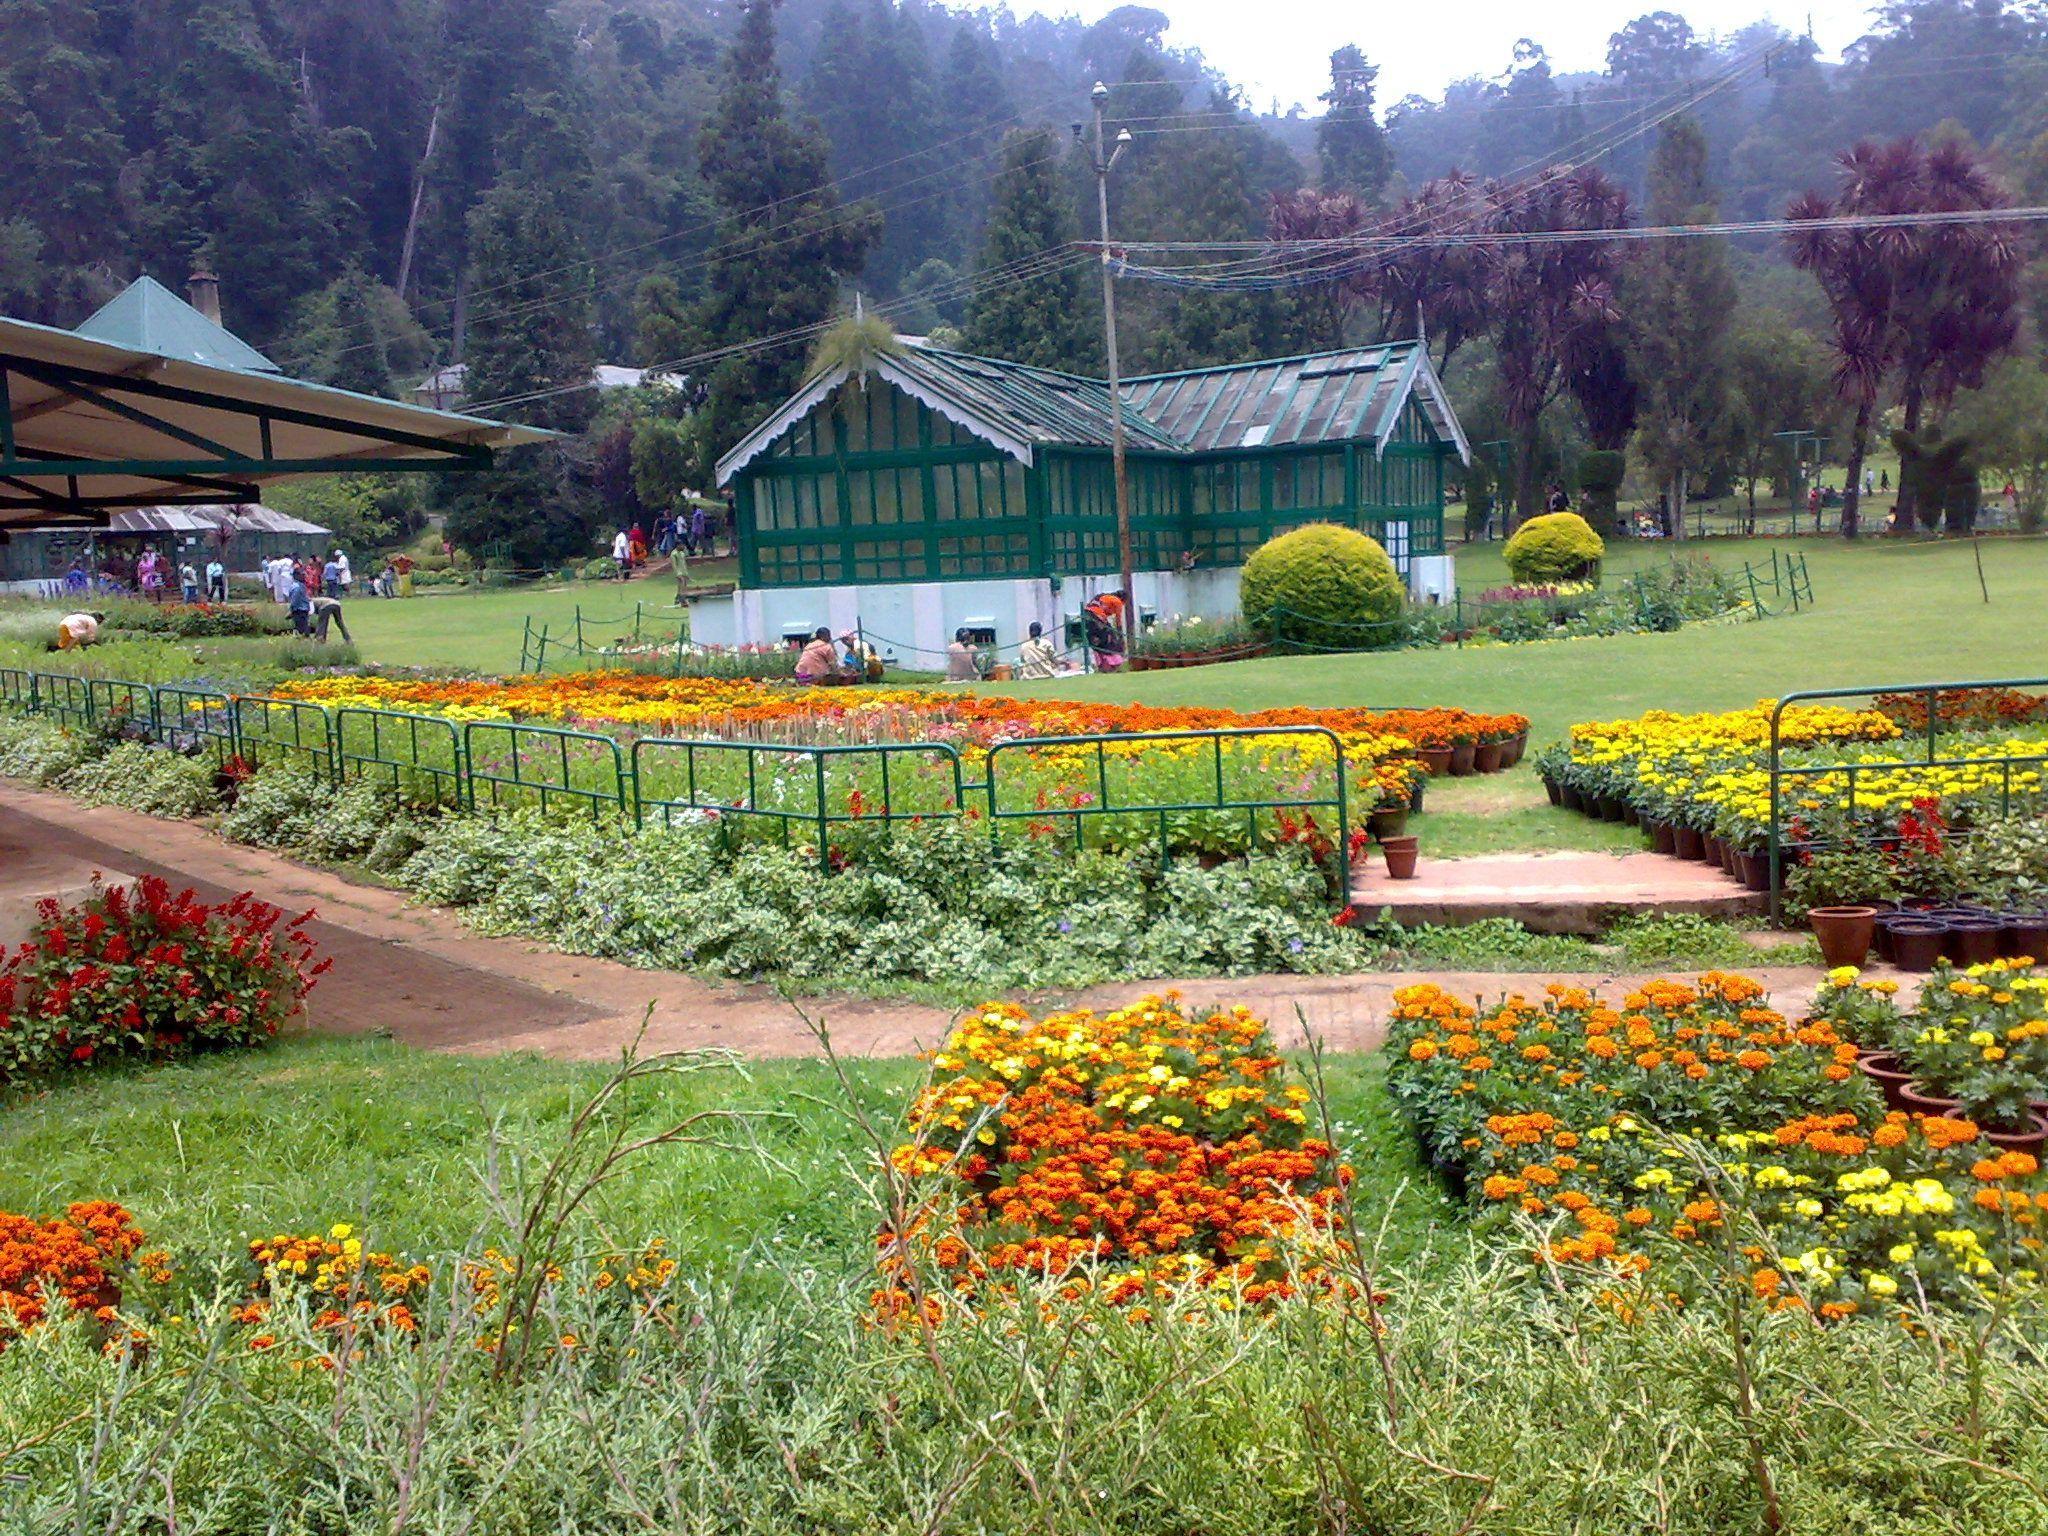 OOTY BOTANICAL GARDENS Photo, Image and Wallpaper